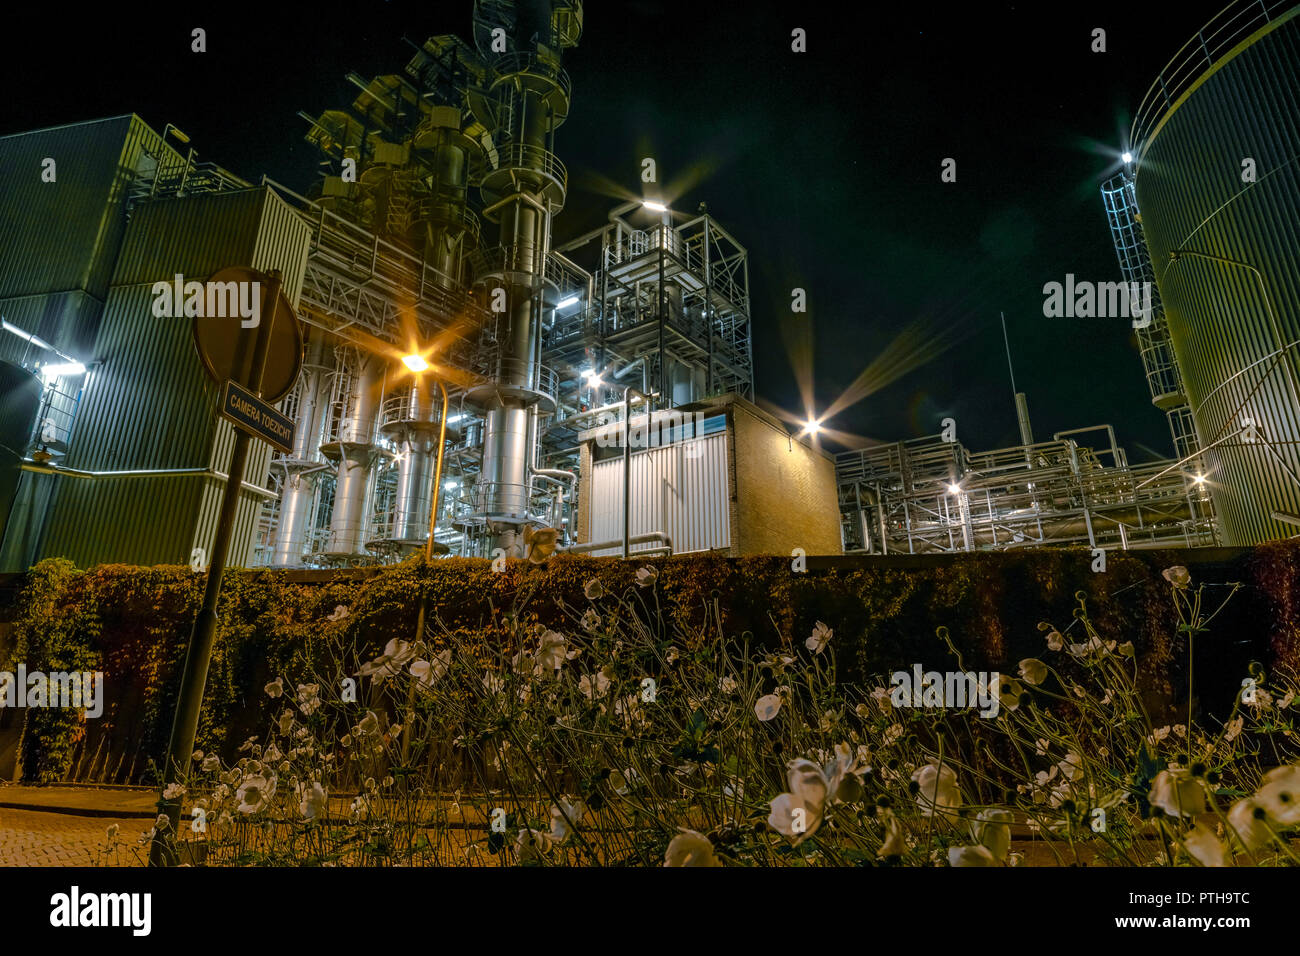 Industry at Night. Chemical plant of Unilever in Gouda, Netherlands by night. Photograph taken with a wide angle lens. Stock Photo